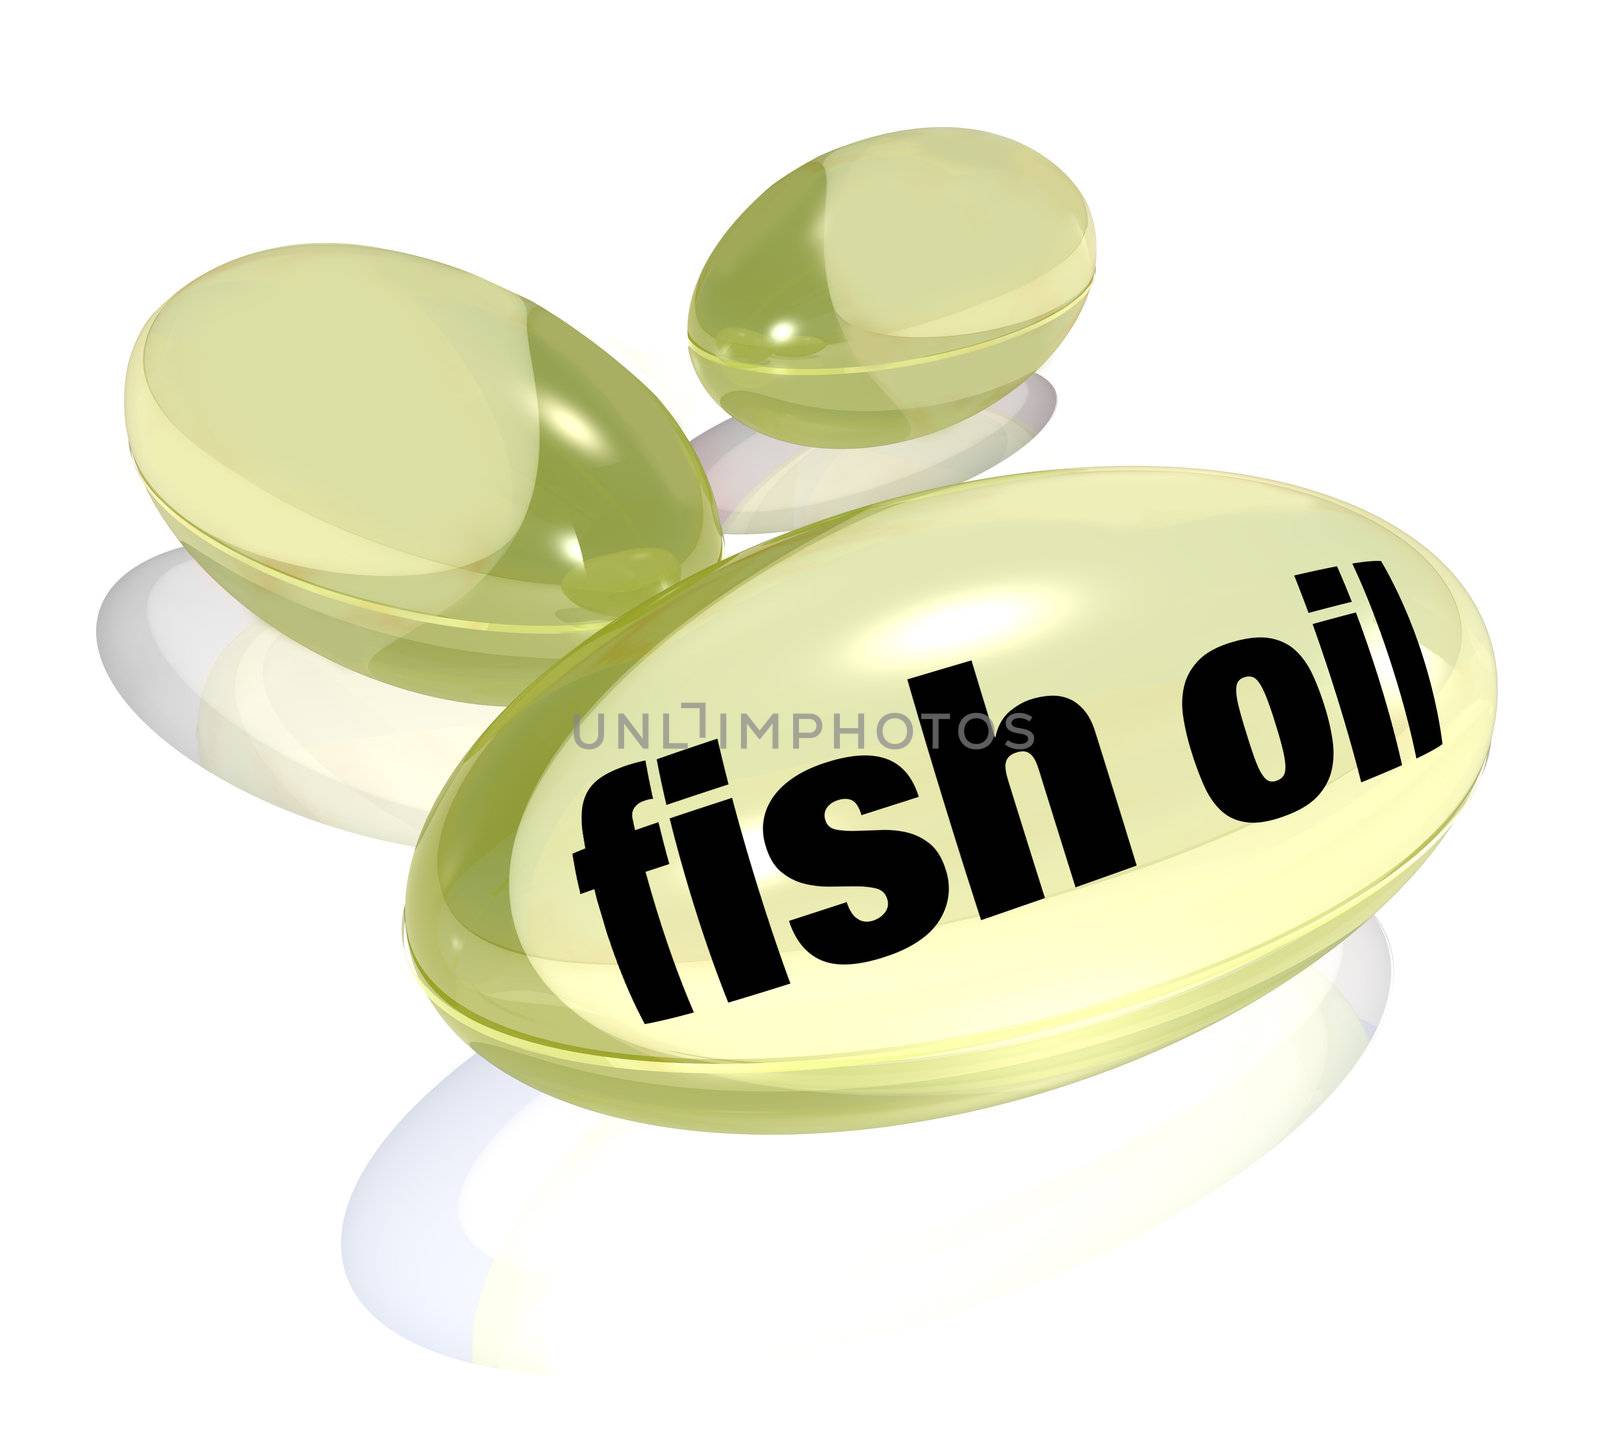 Three yellow fish oil capsule pills for consumption by health consicous people, containing omega-3 fatty acids that are believed to have benefits in preventing cancer and heart disease